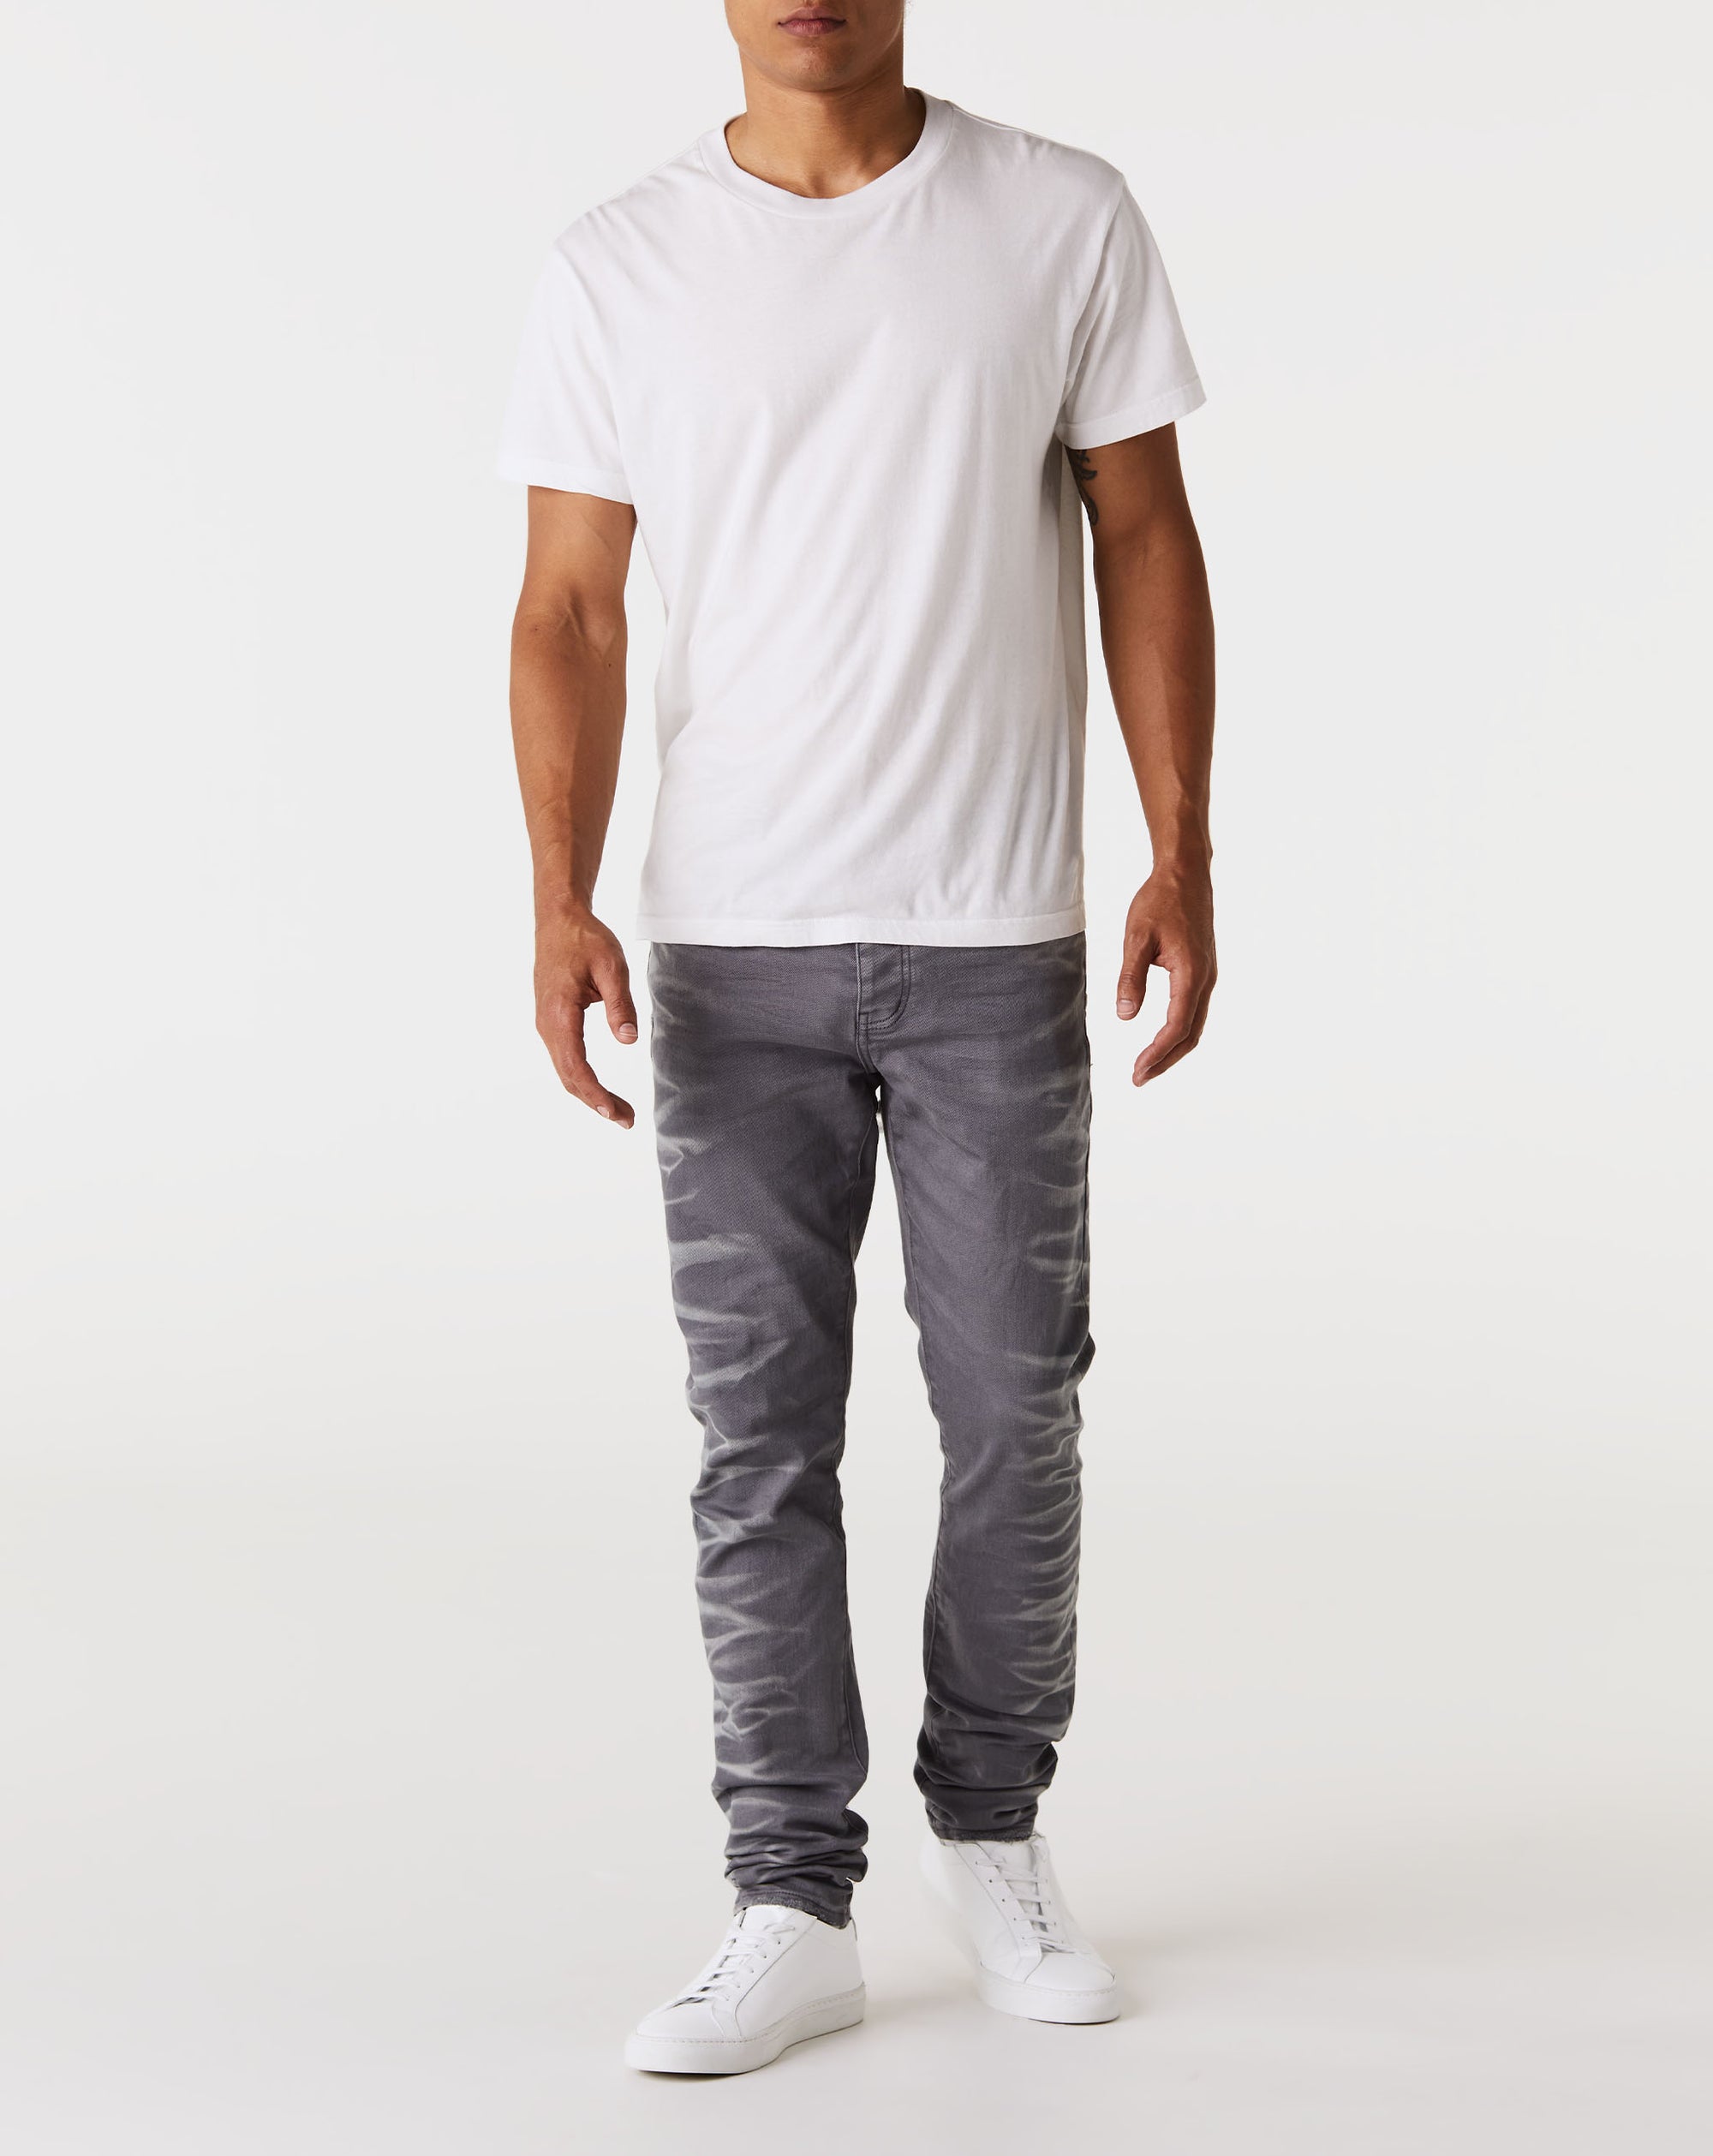 Purple Brand Low Rise Skinny Jeans - Rule of Next Apparel